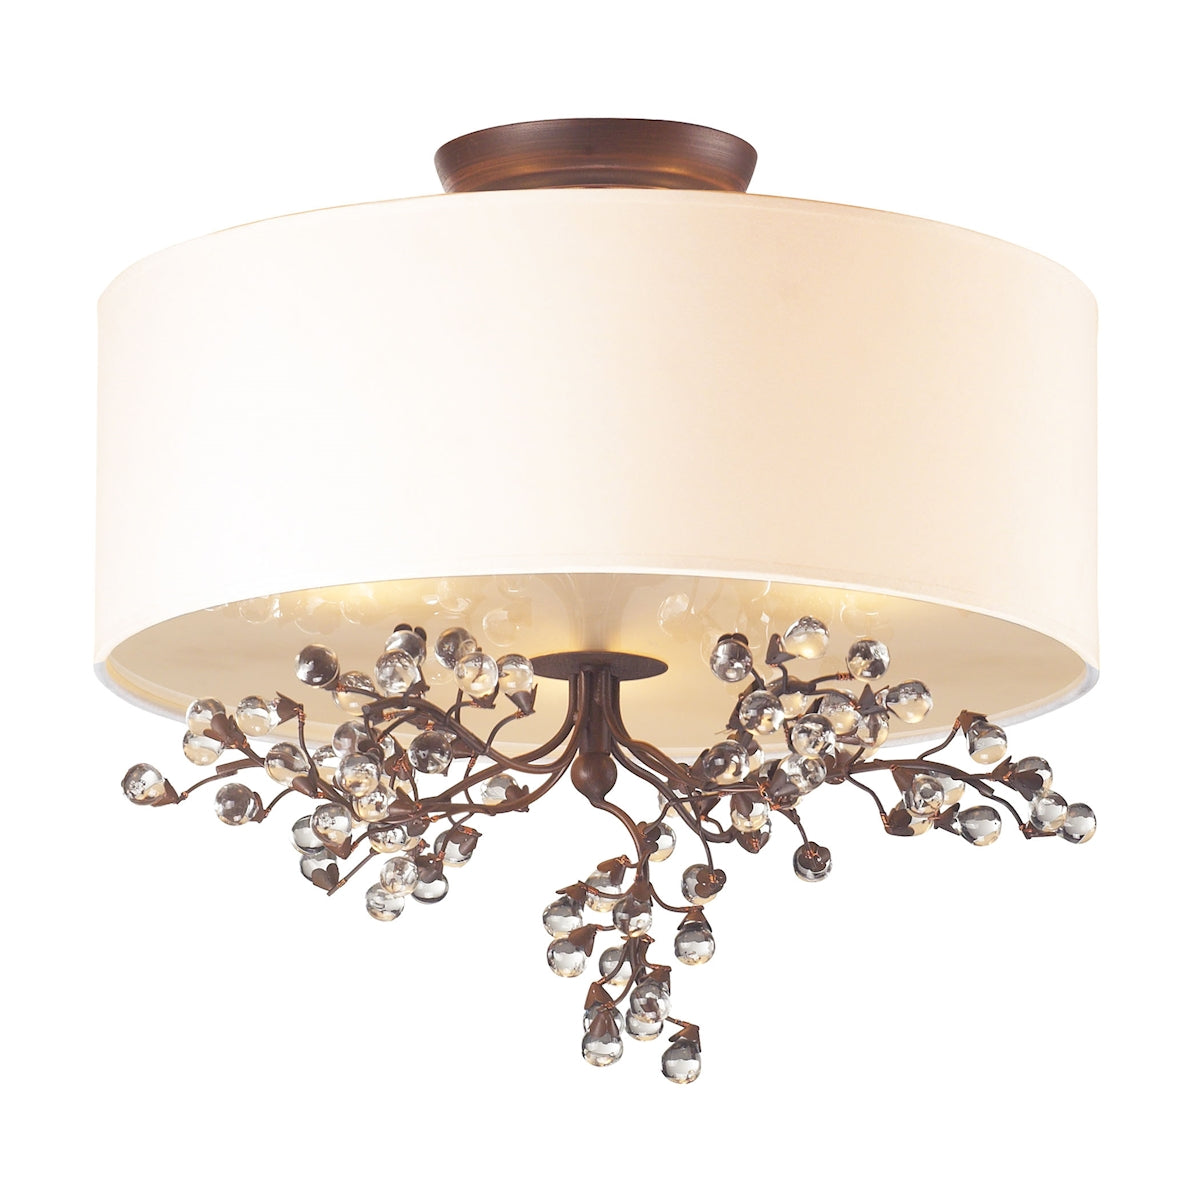 ELK Lighting 20089/3 - Winterberry 16" Wide3-Light Semi Flush in Antique Darkwood with Shade and Gla